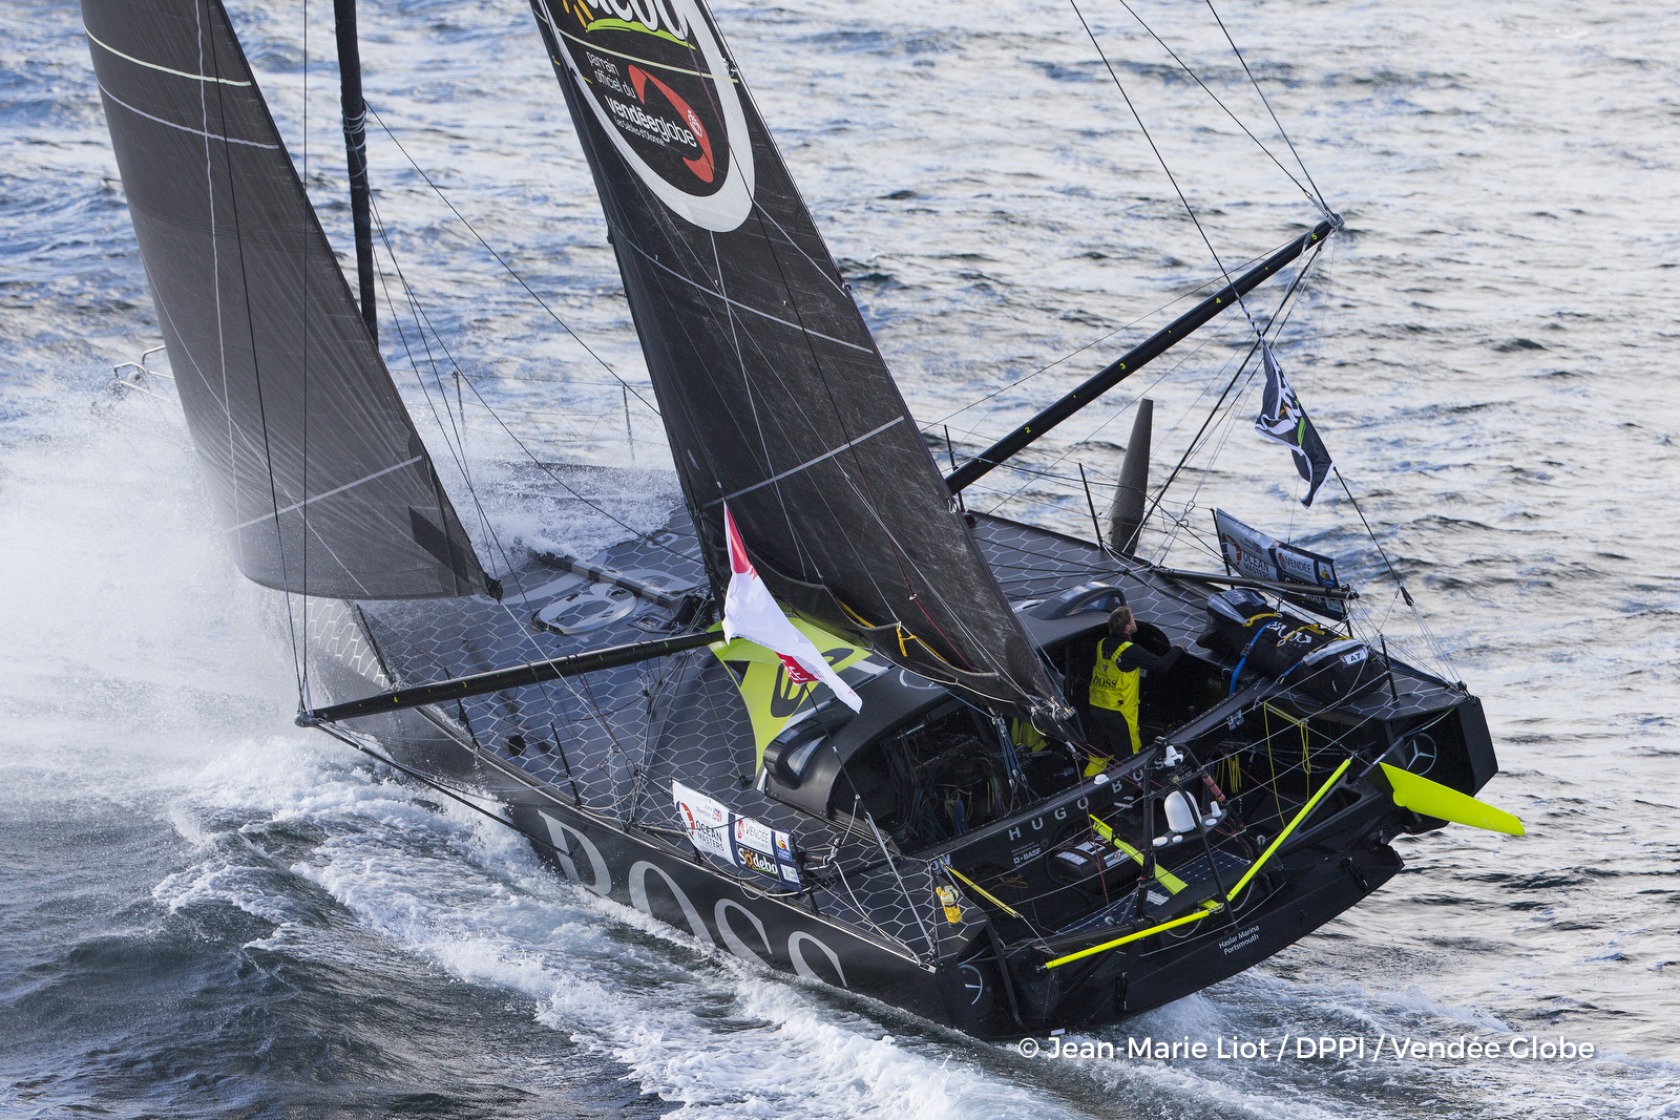  IMOCA Open 60  Vendee Globe 2016/17  Day 73   final day for Le Cleac'h FRA and Thomson GBR